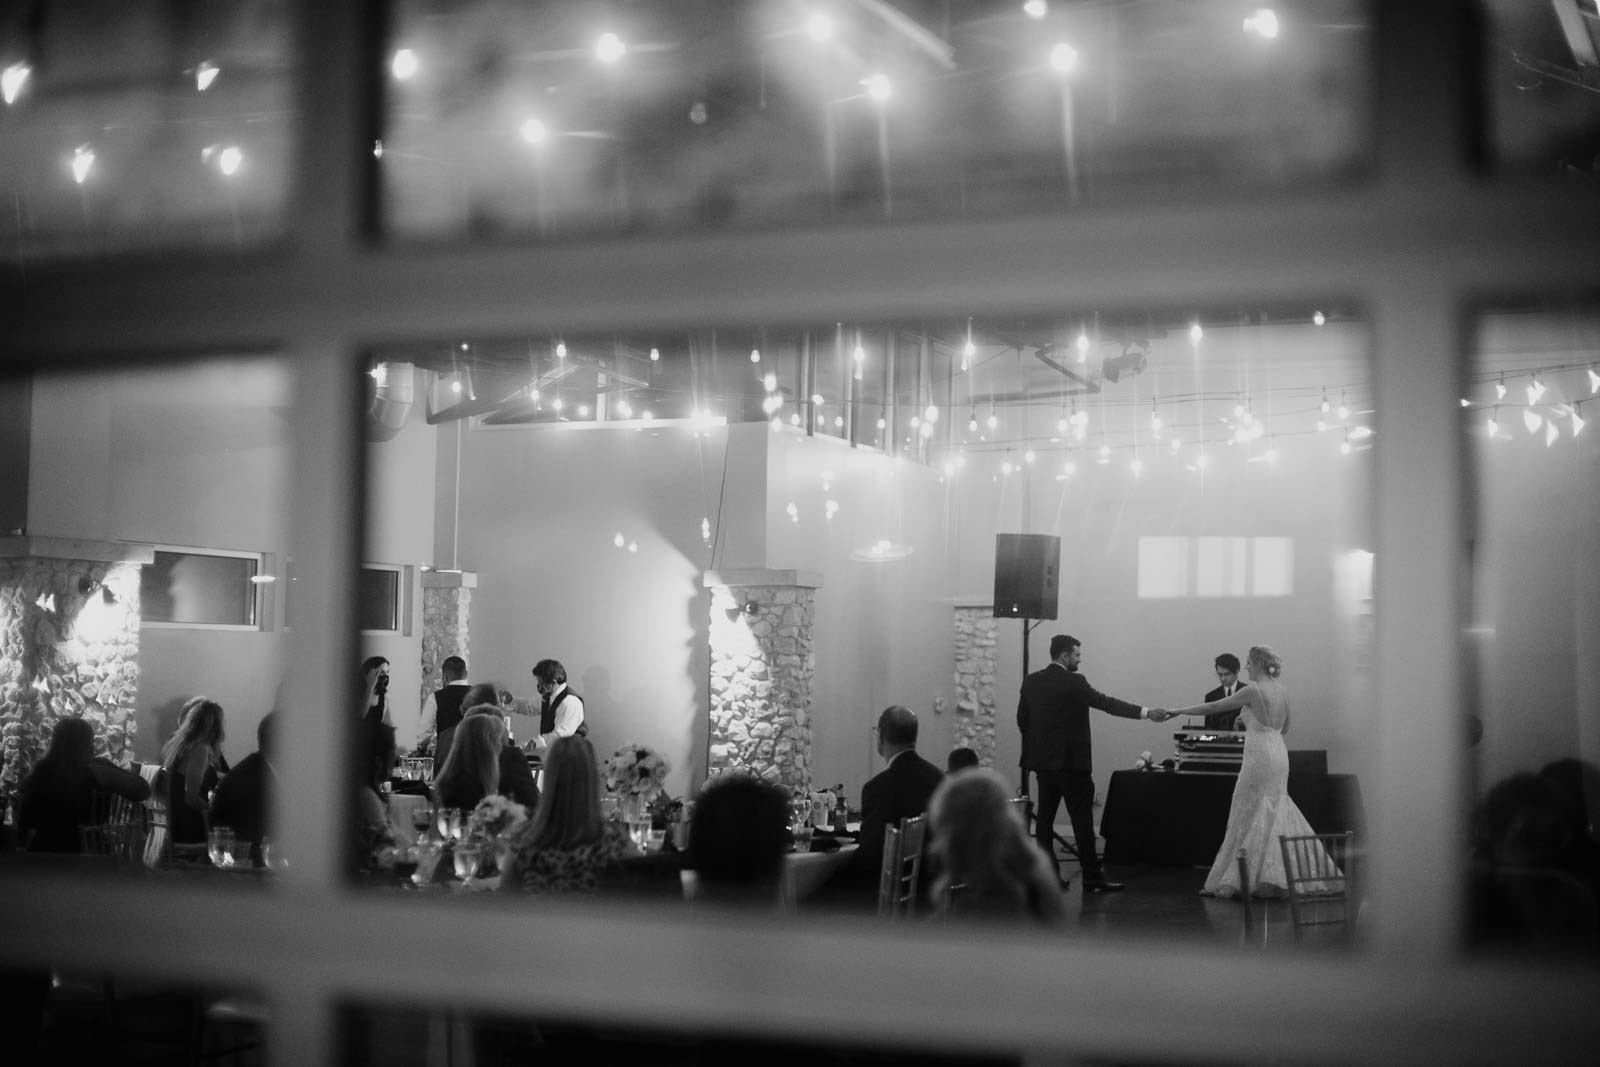 The couples first dance at a wedding reception why don’t go shot with lights in the ceiling